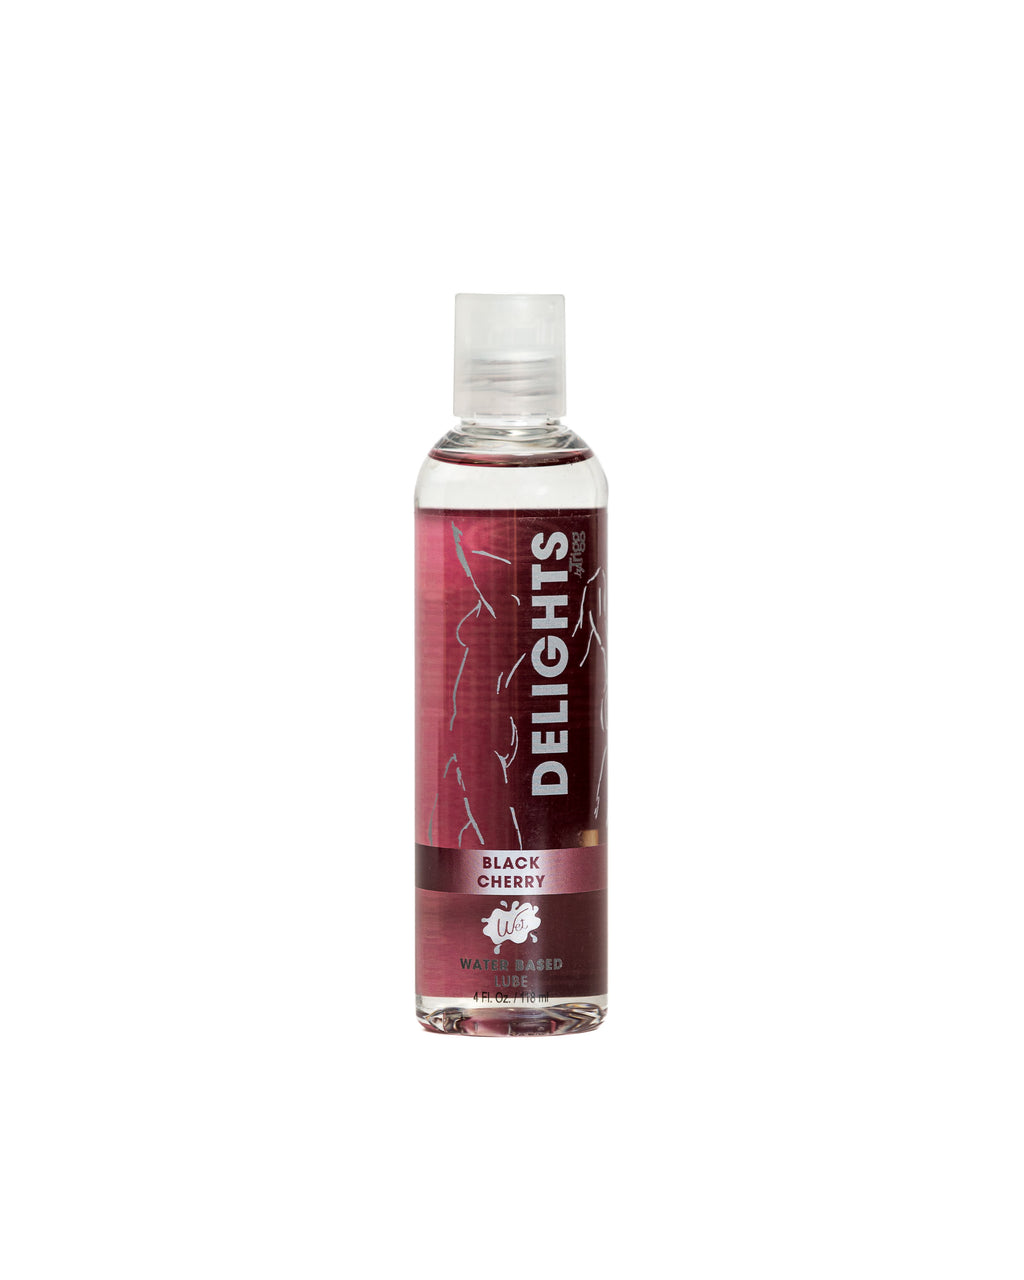 Delight Water Based - Black Cherry - Flavored Lube 4 Oz WT21528